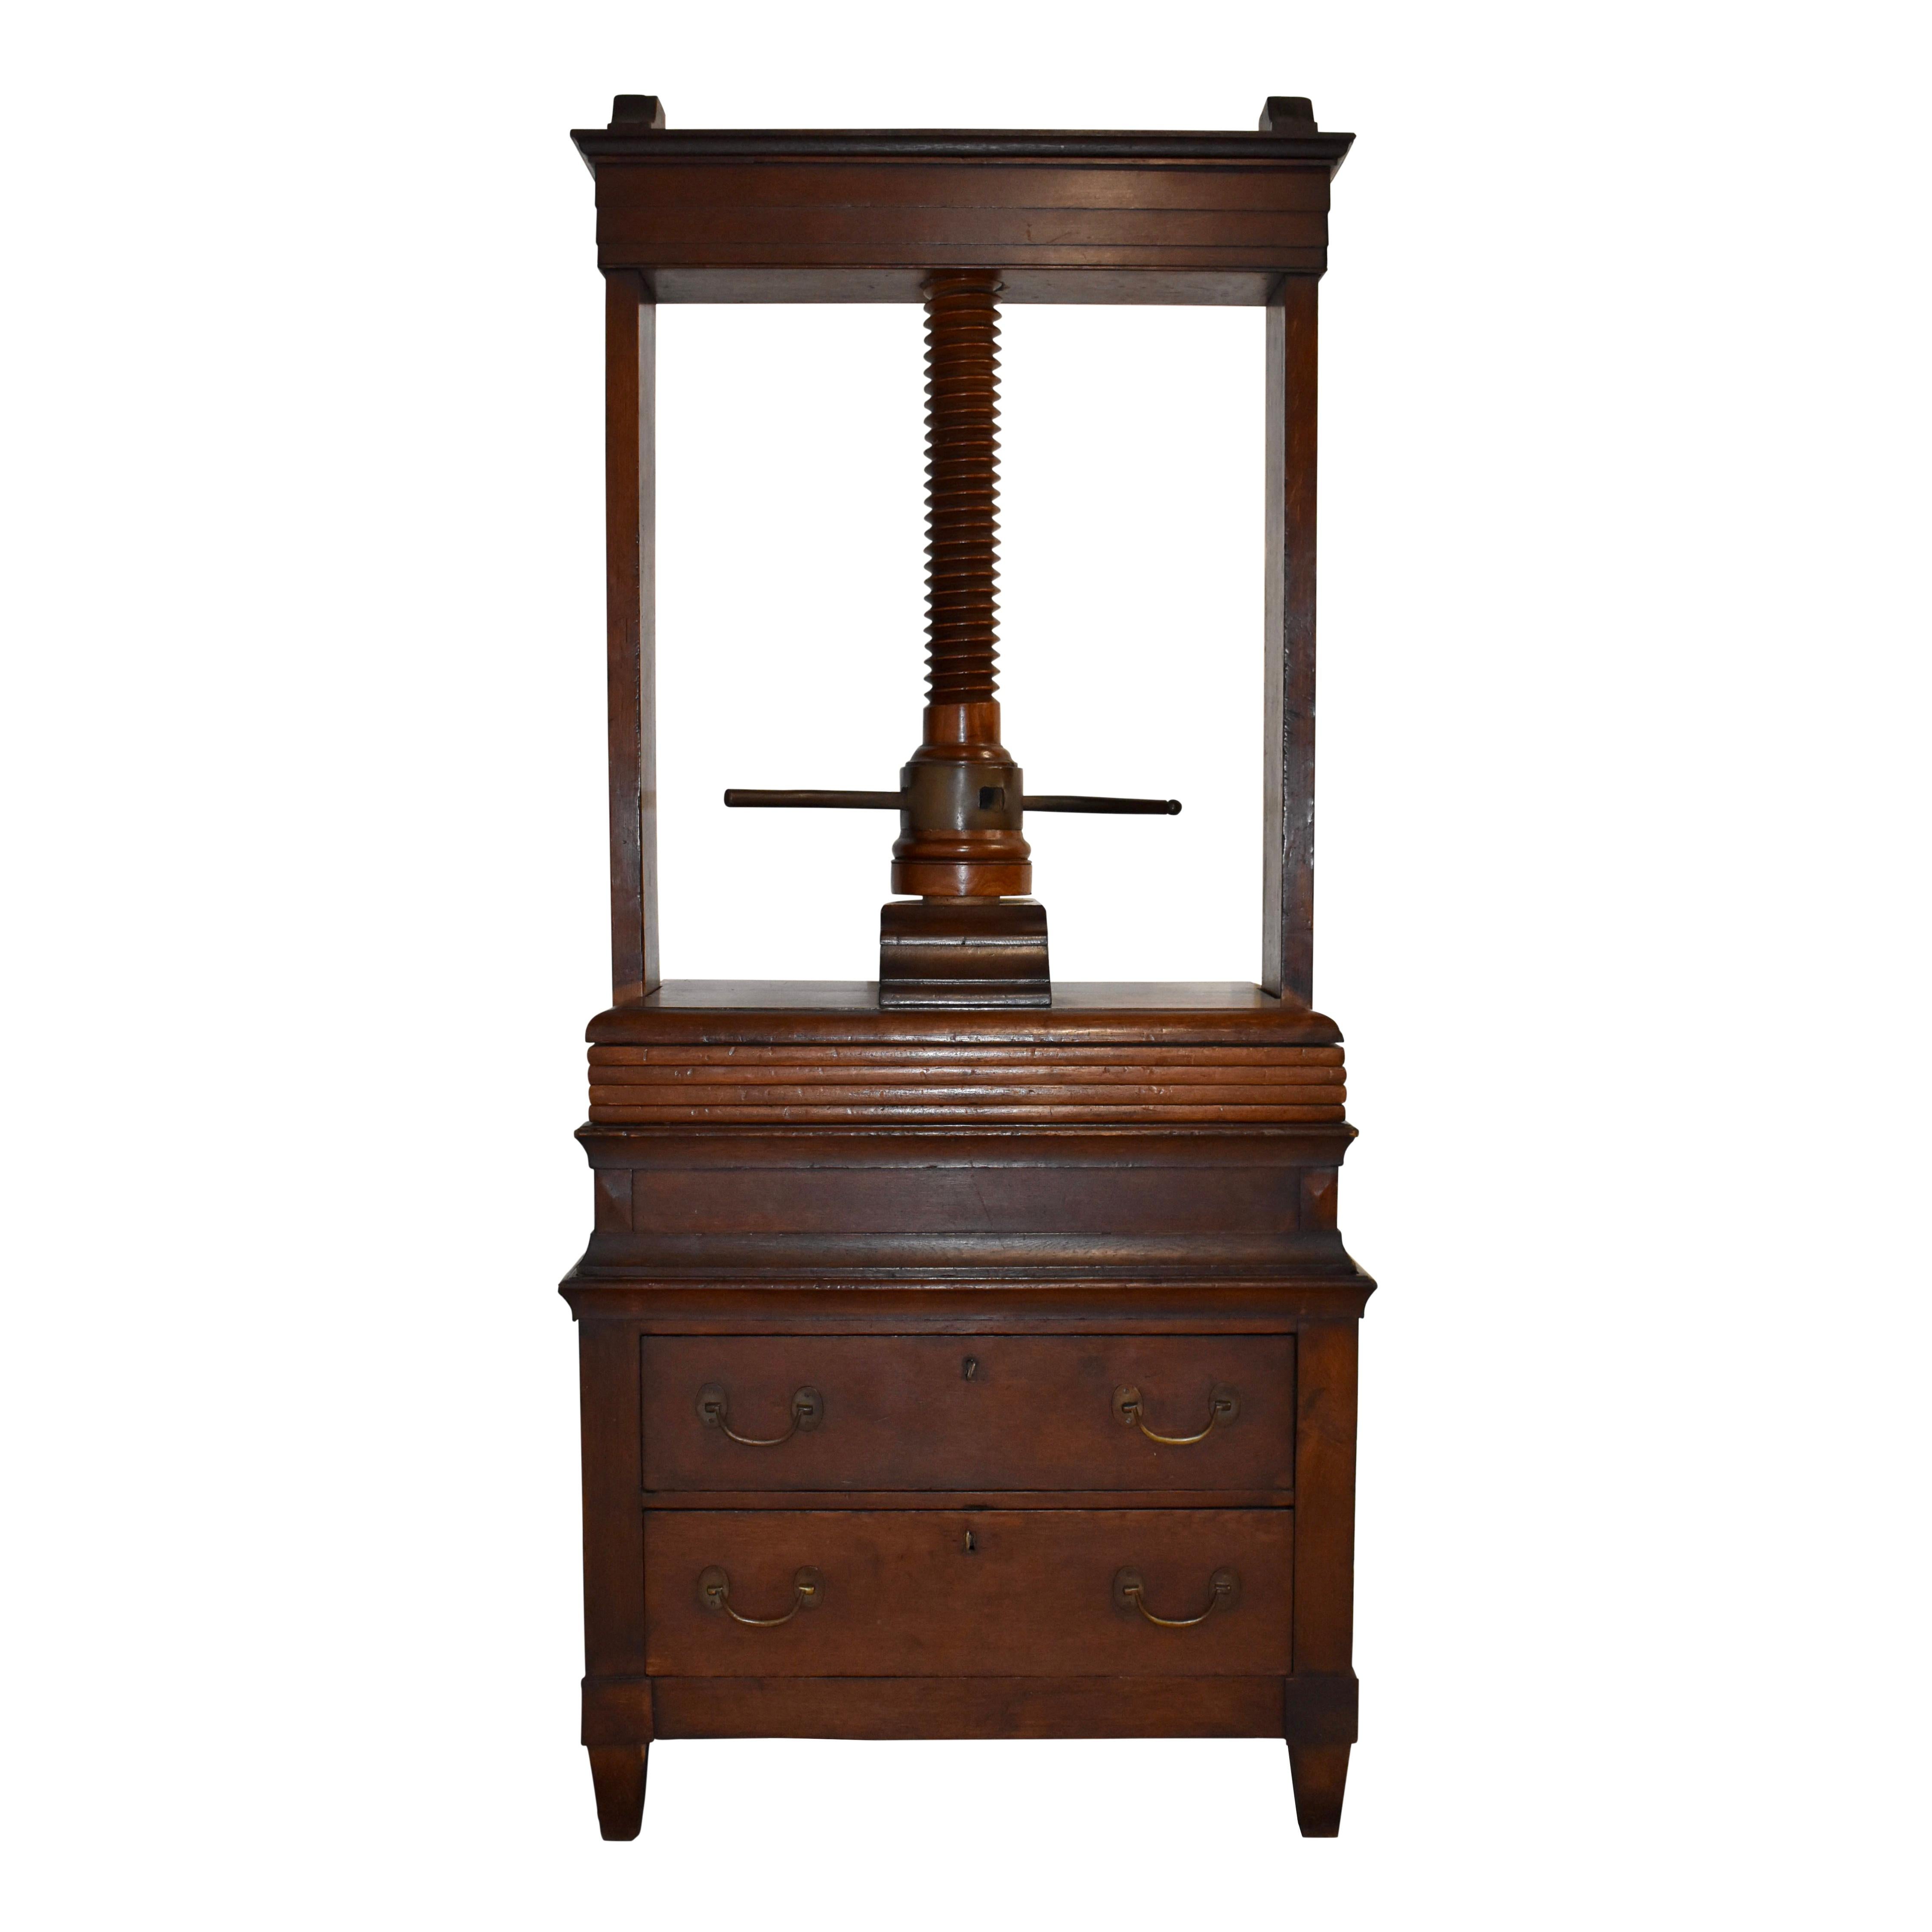 The press sits on a two drawer cabinet, convenient for storing freshly pressed items. Large presses like this one were valuable and occupied prominent rooms in the homes of wealthy owners. They were used to press garments, table napkins, aprons, and